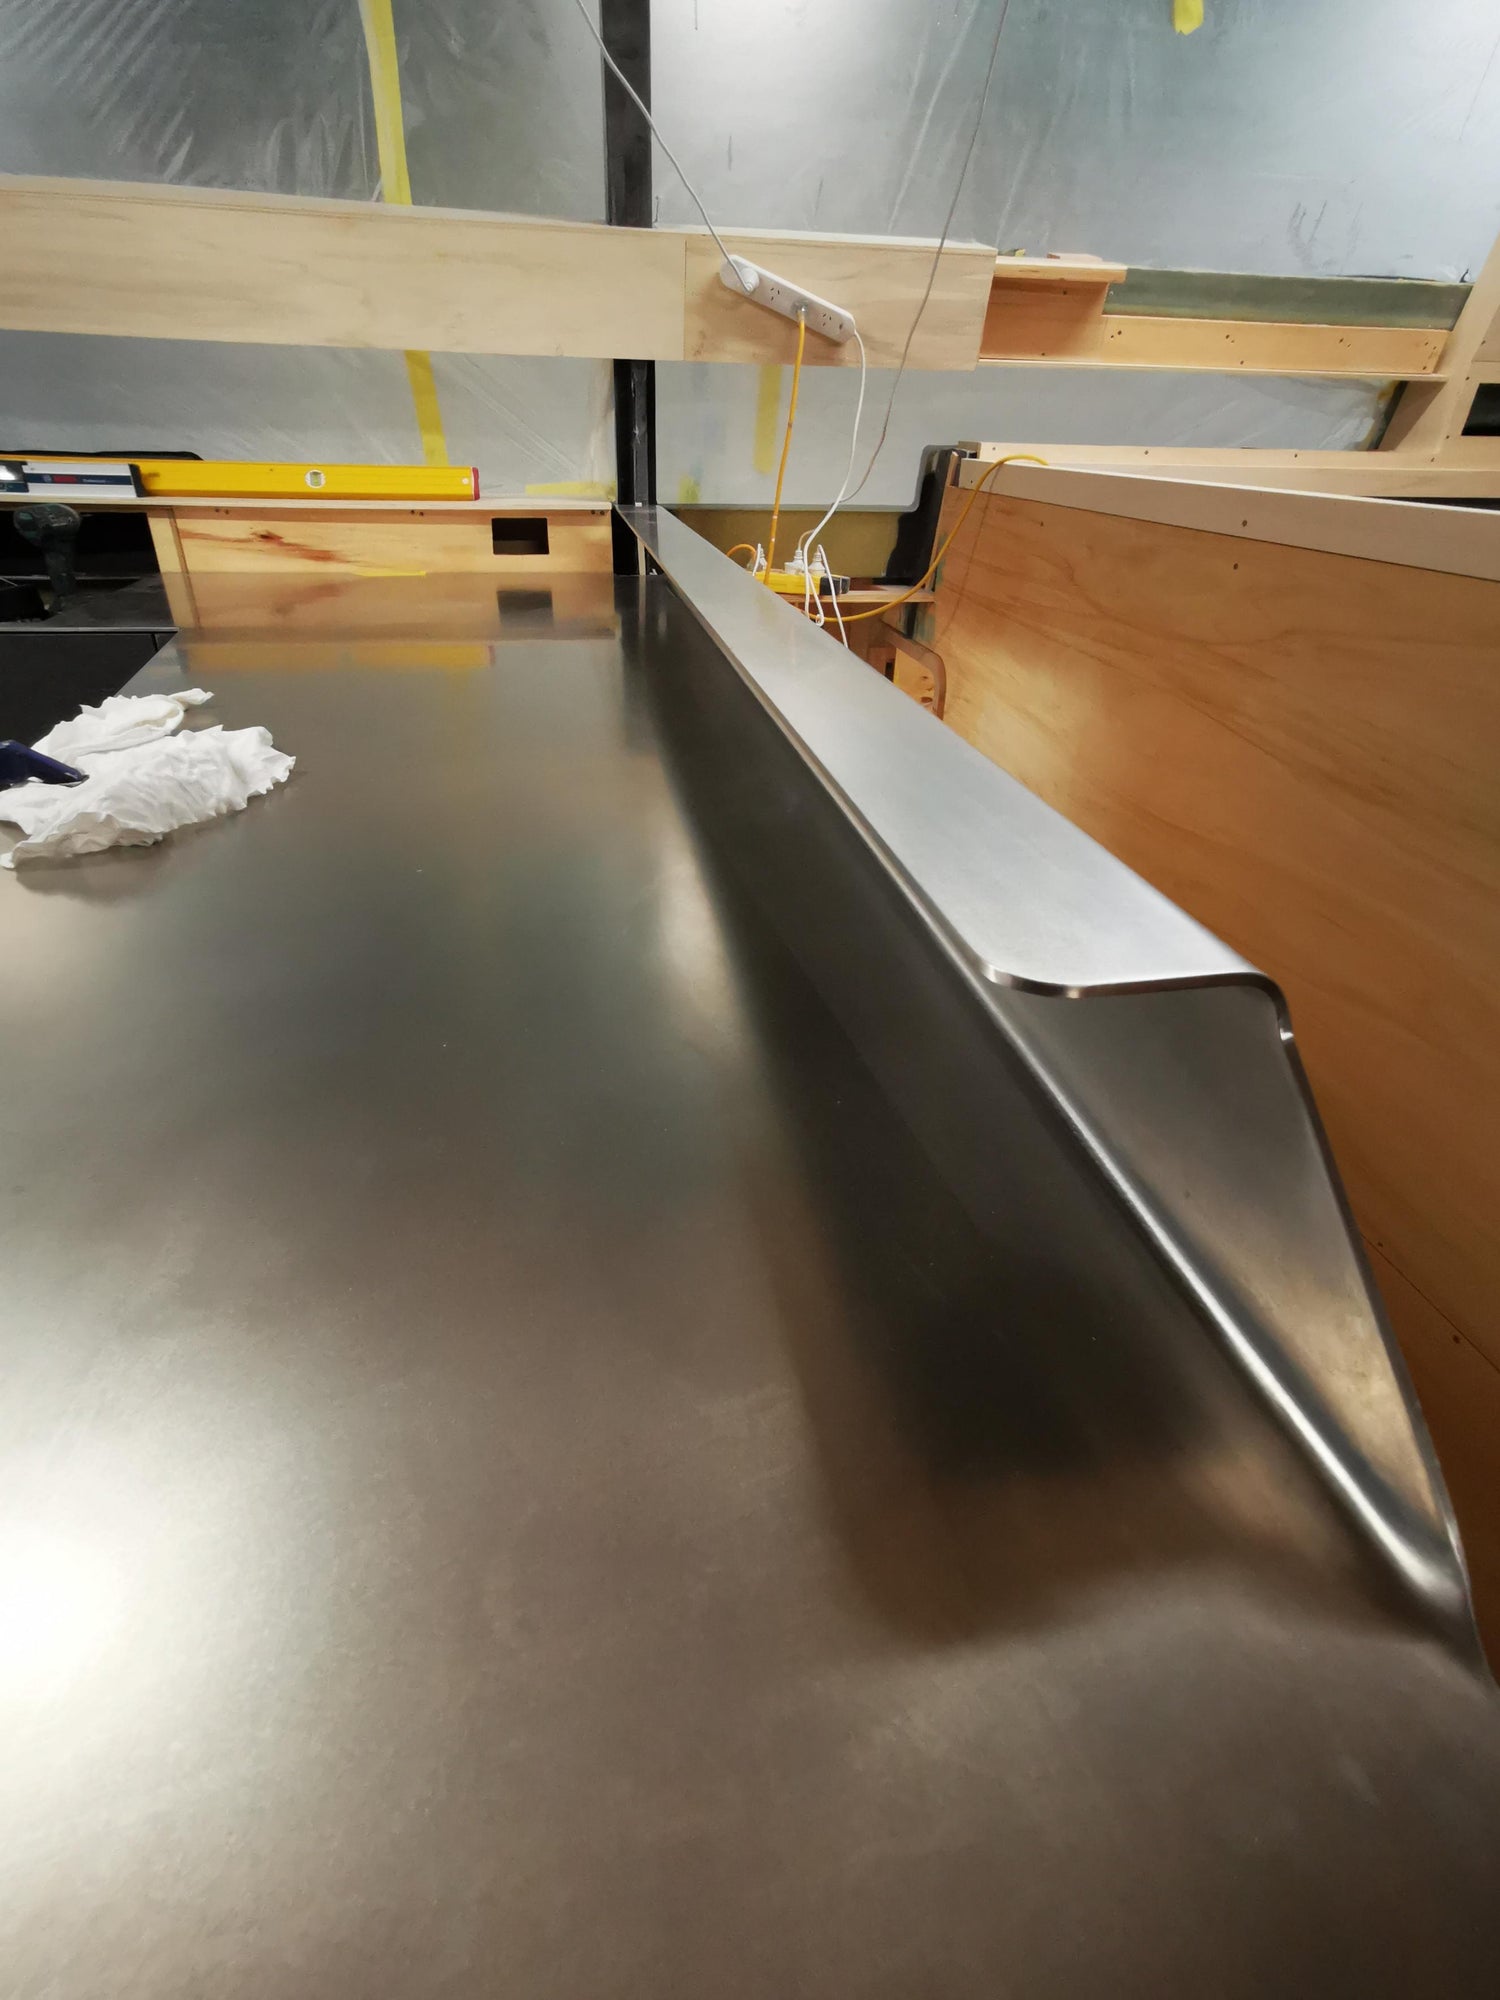 We complete our stainless steel worktops with a variety of standard brushed finishes: